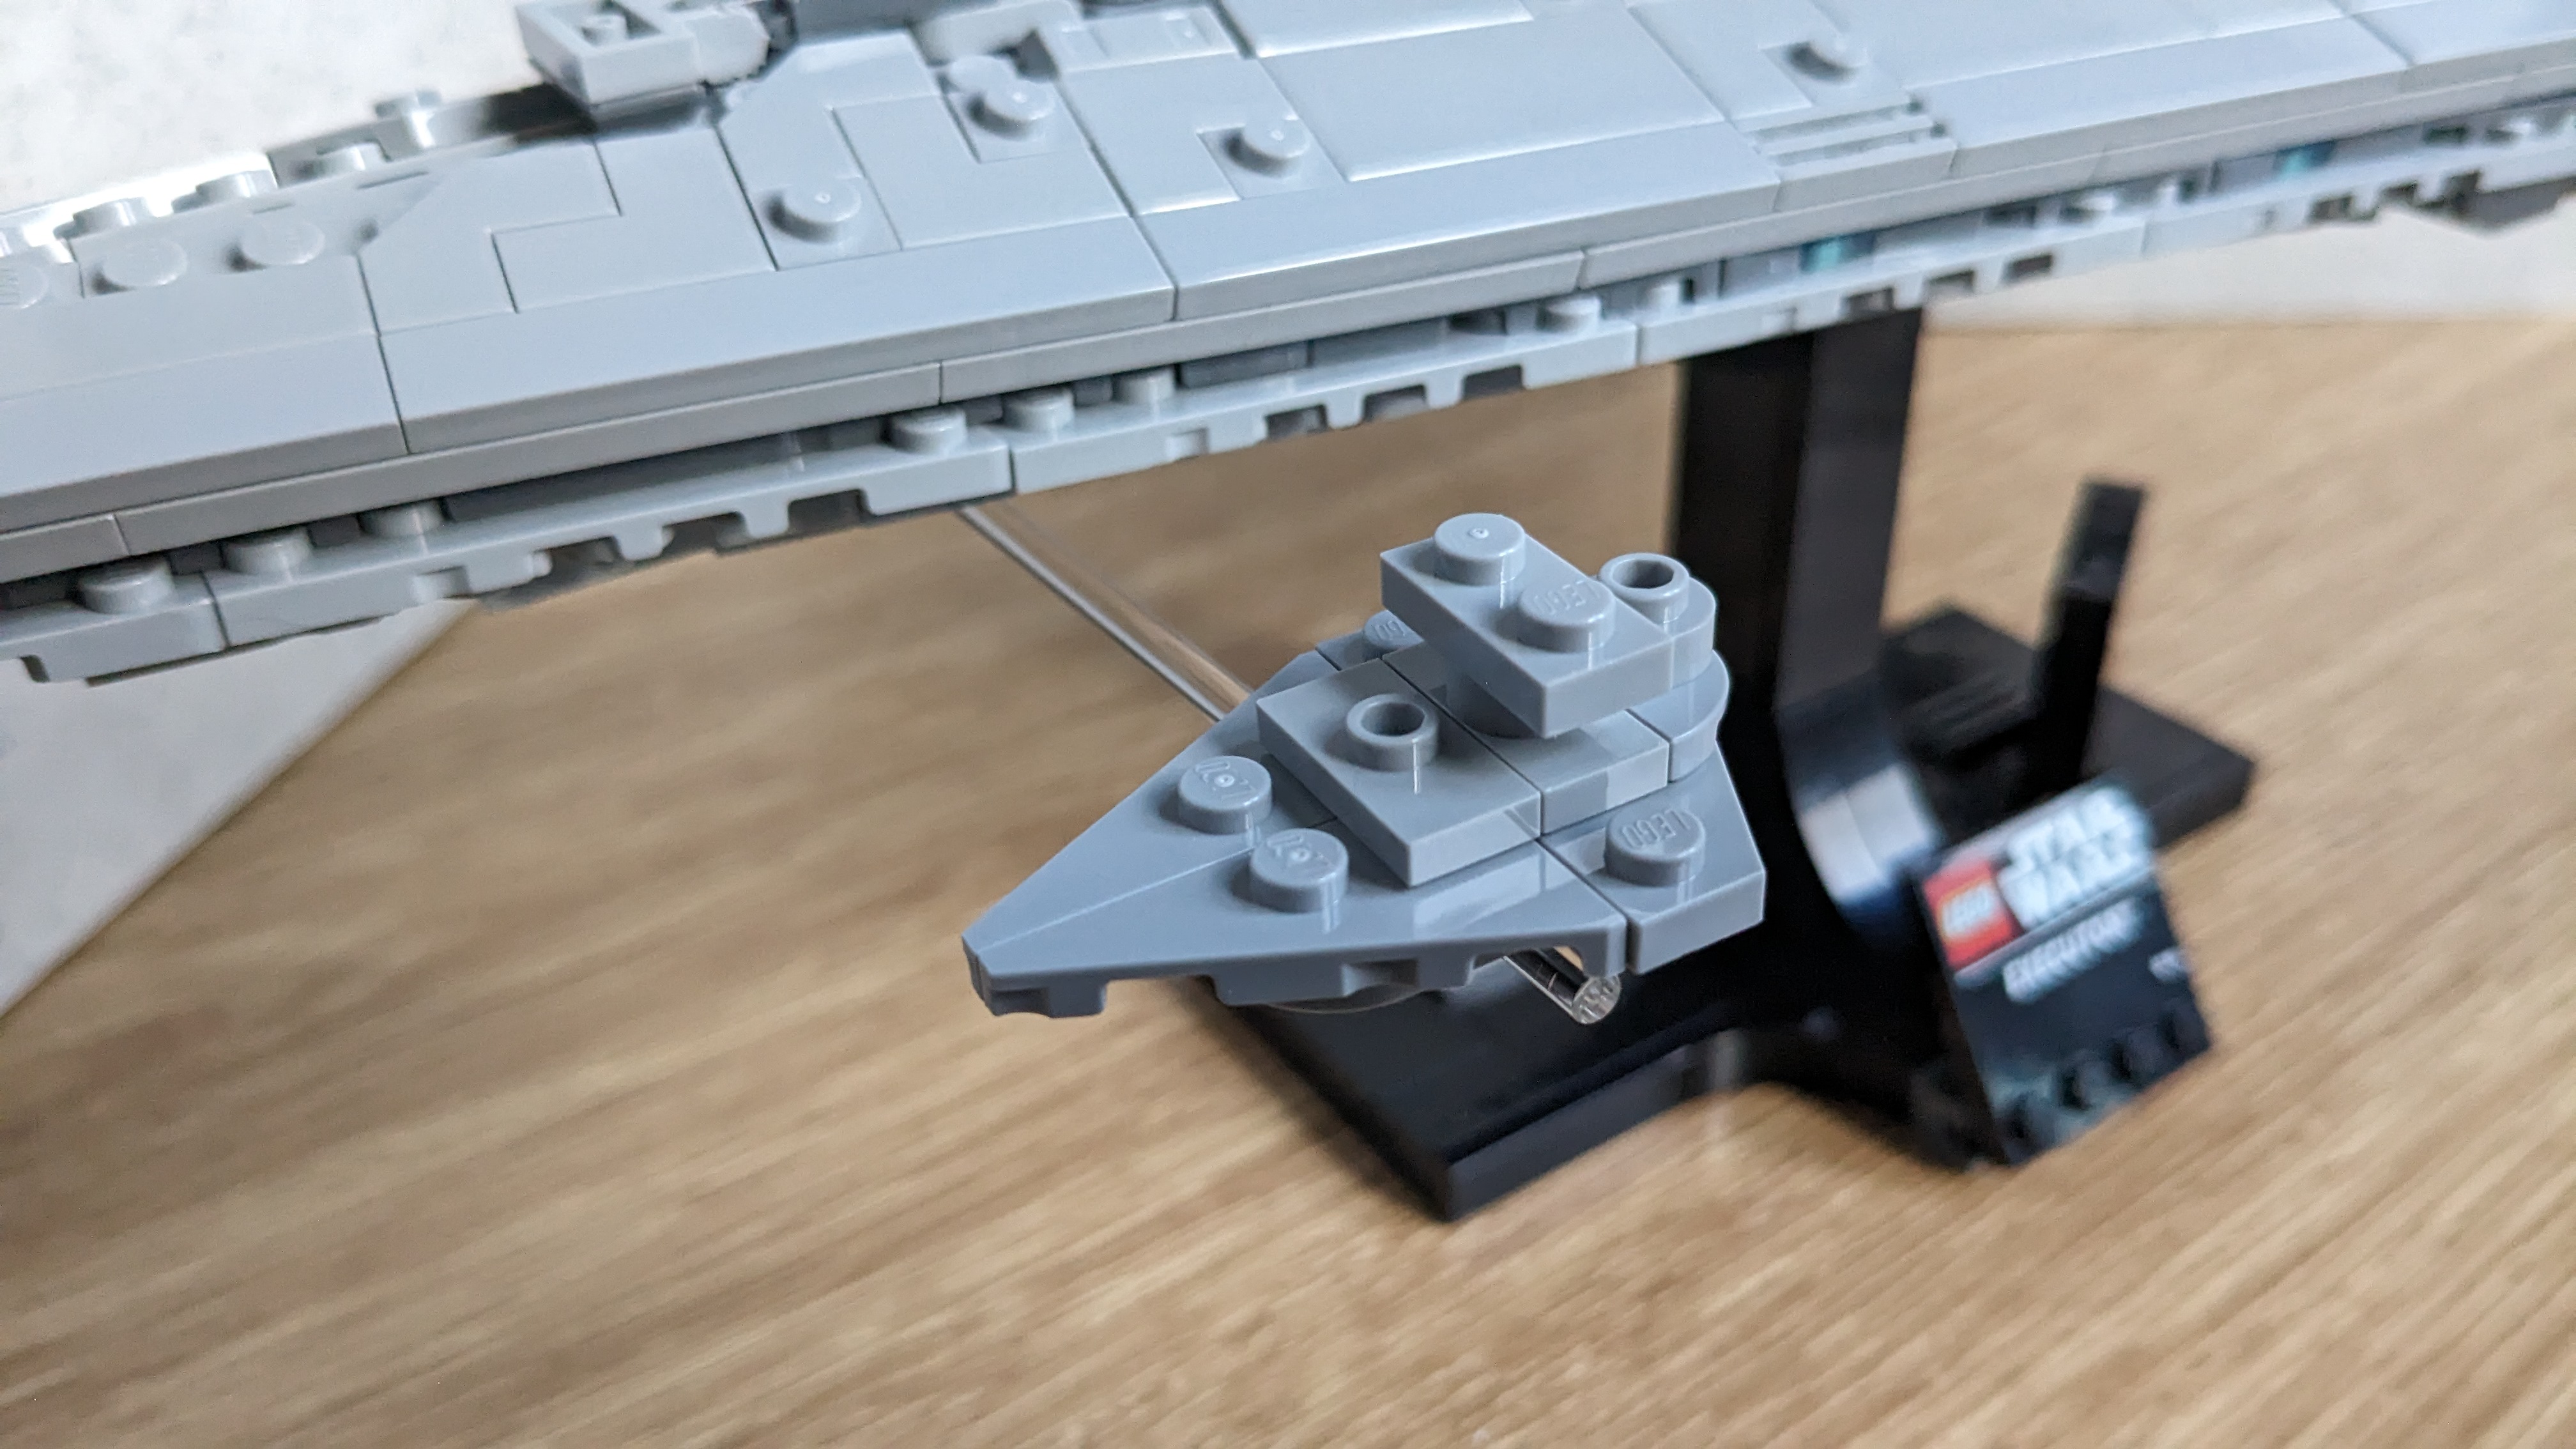 A close-up of one of the 'little' Star Destroyers, giving the Executor a sense of scale.